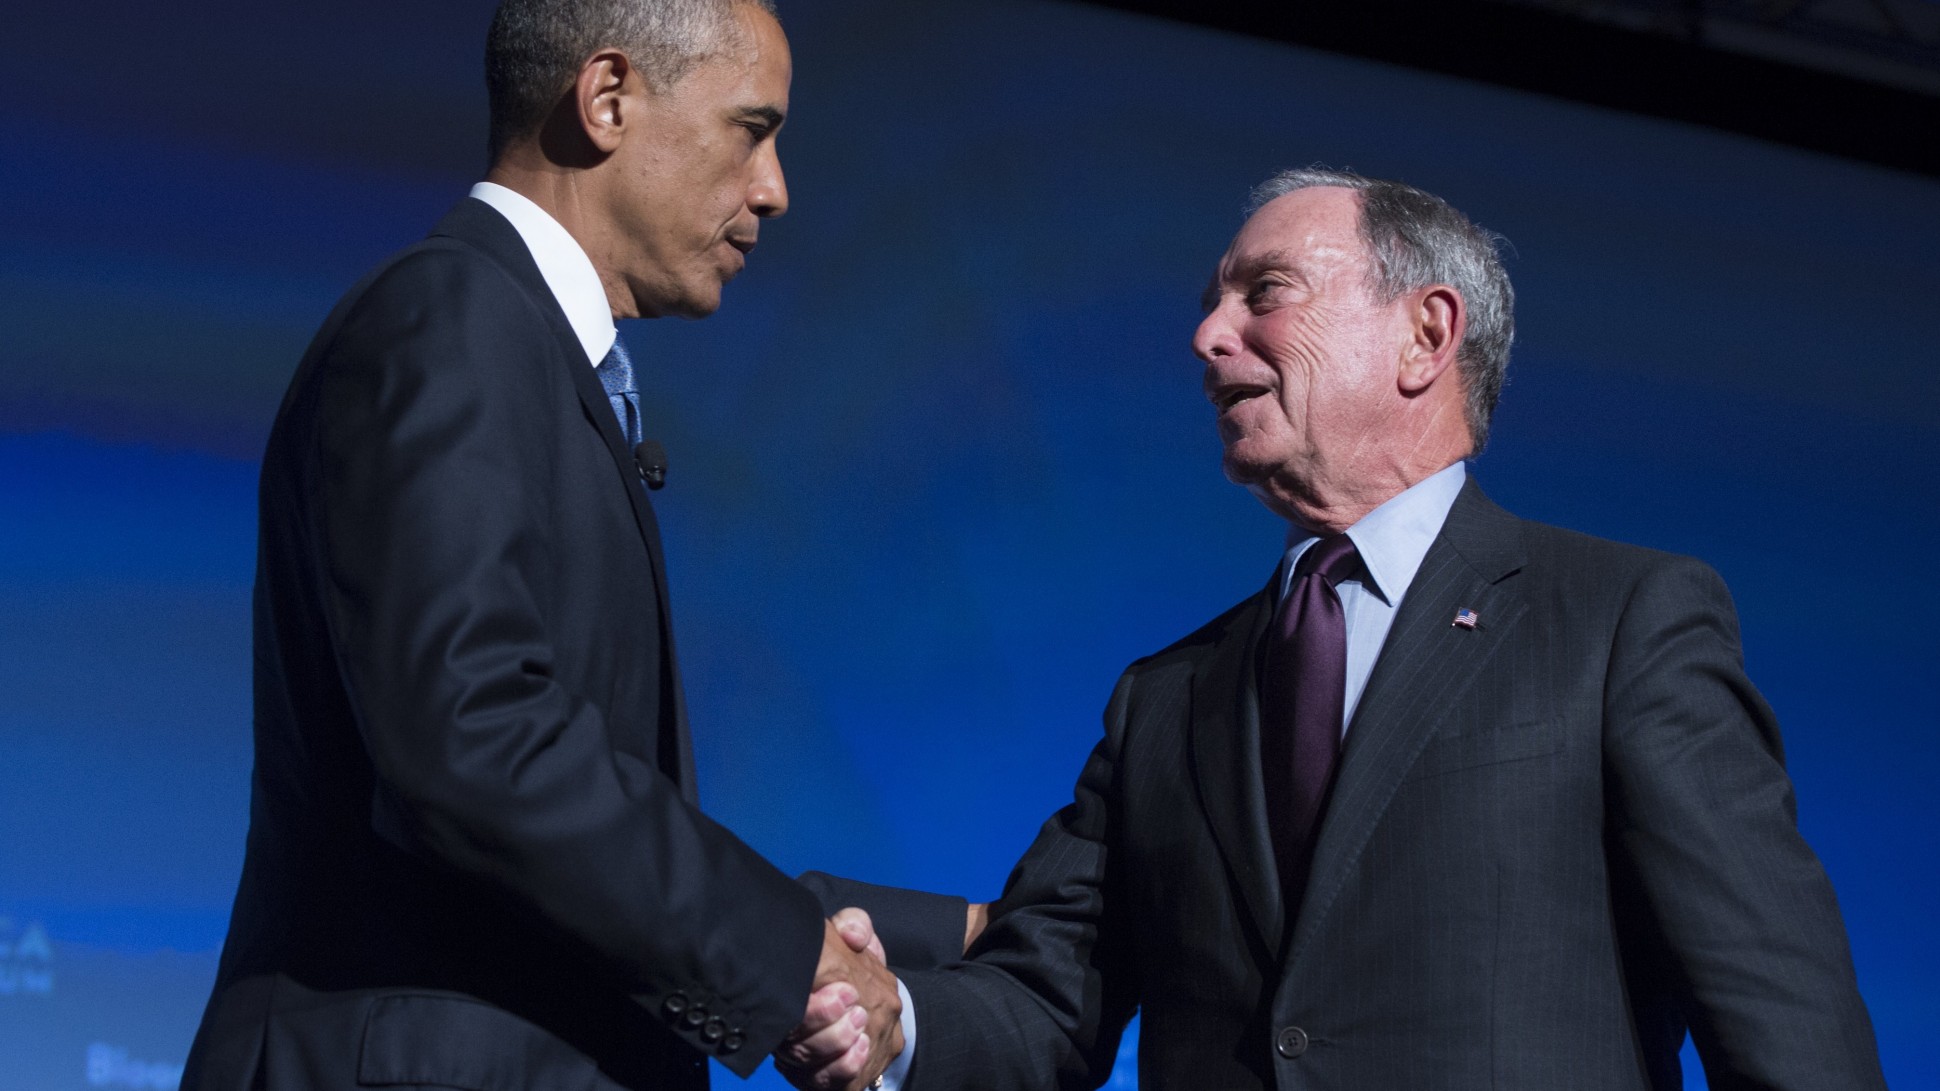 Panderer-in-chief: Bloomberg promises taxpayer-funded free gender surgery and housing to transgenders